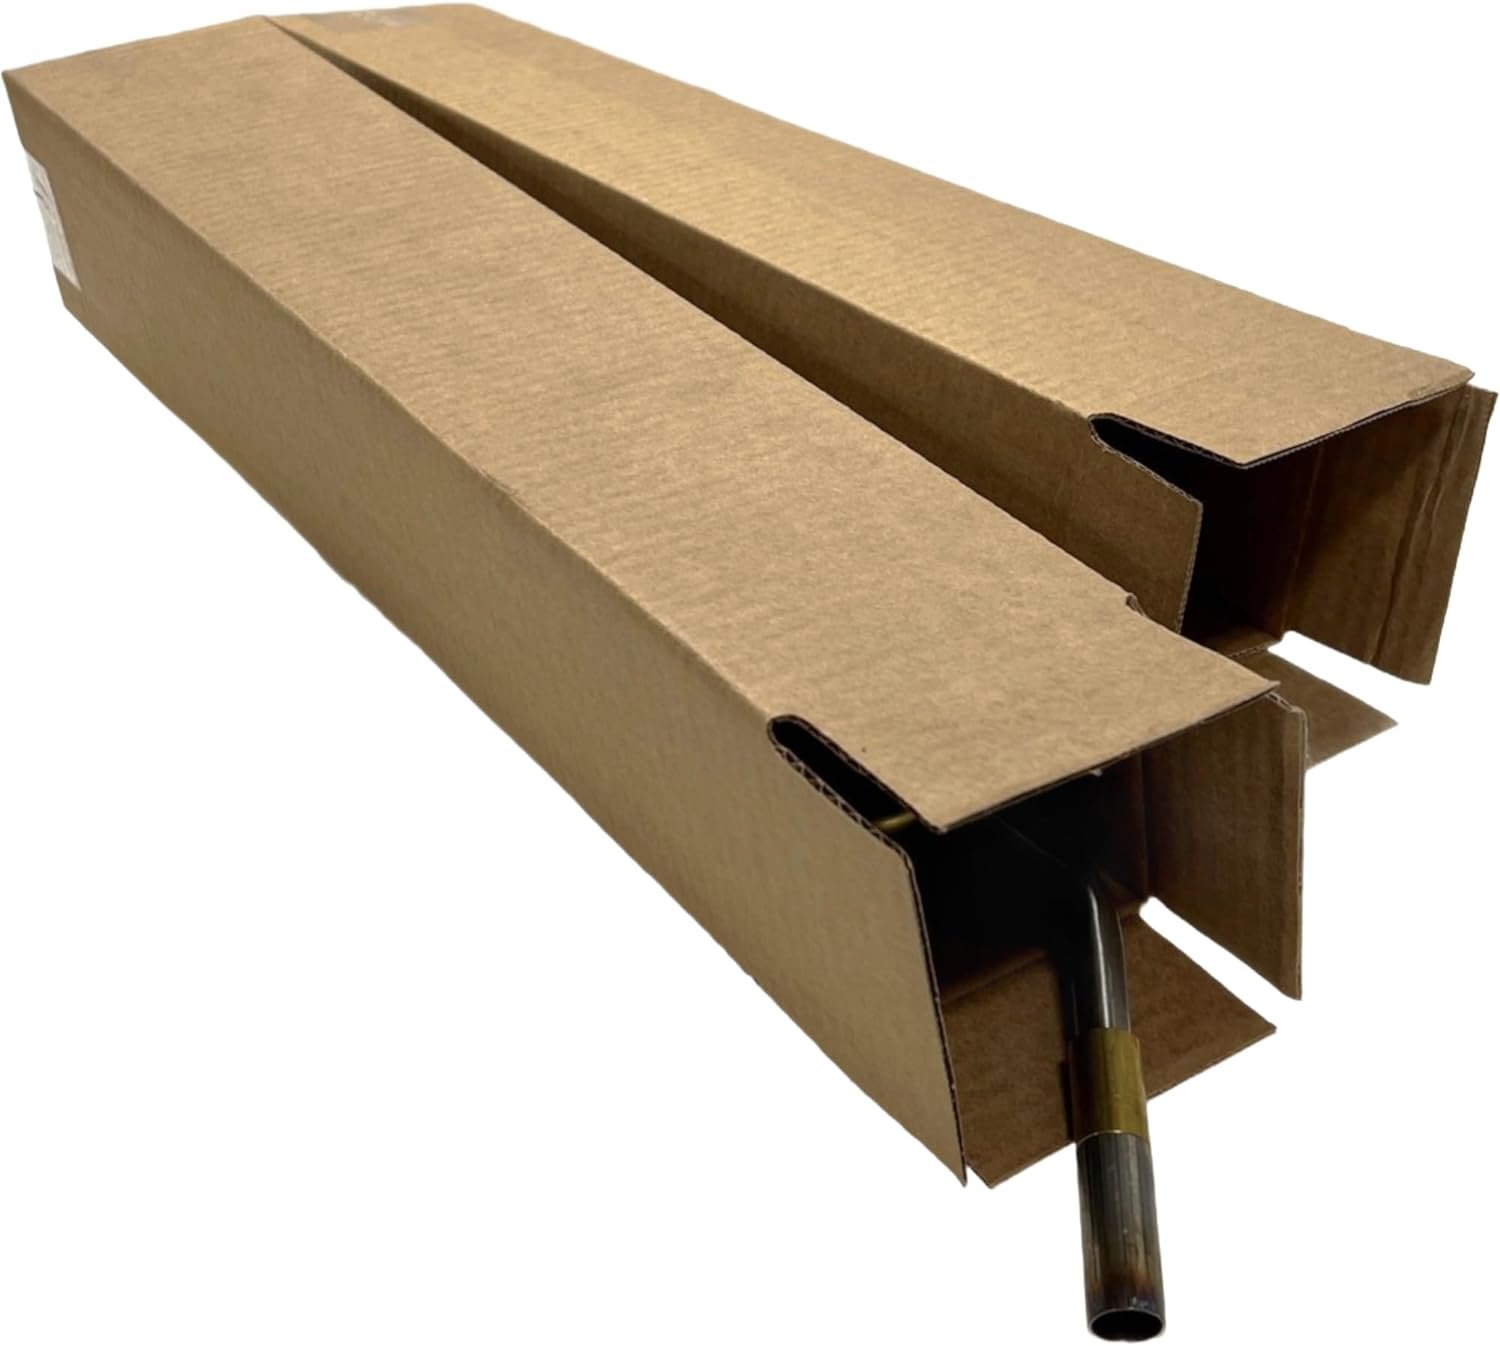 25 4x4x20 Cardboard Paper Boxes Mailing Packing Shipping Box Corrugated Carton